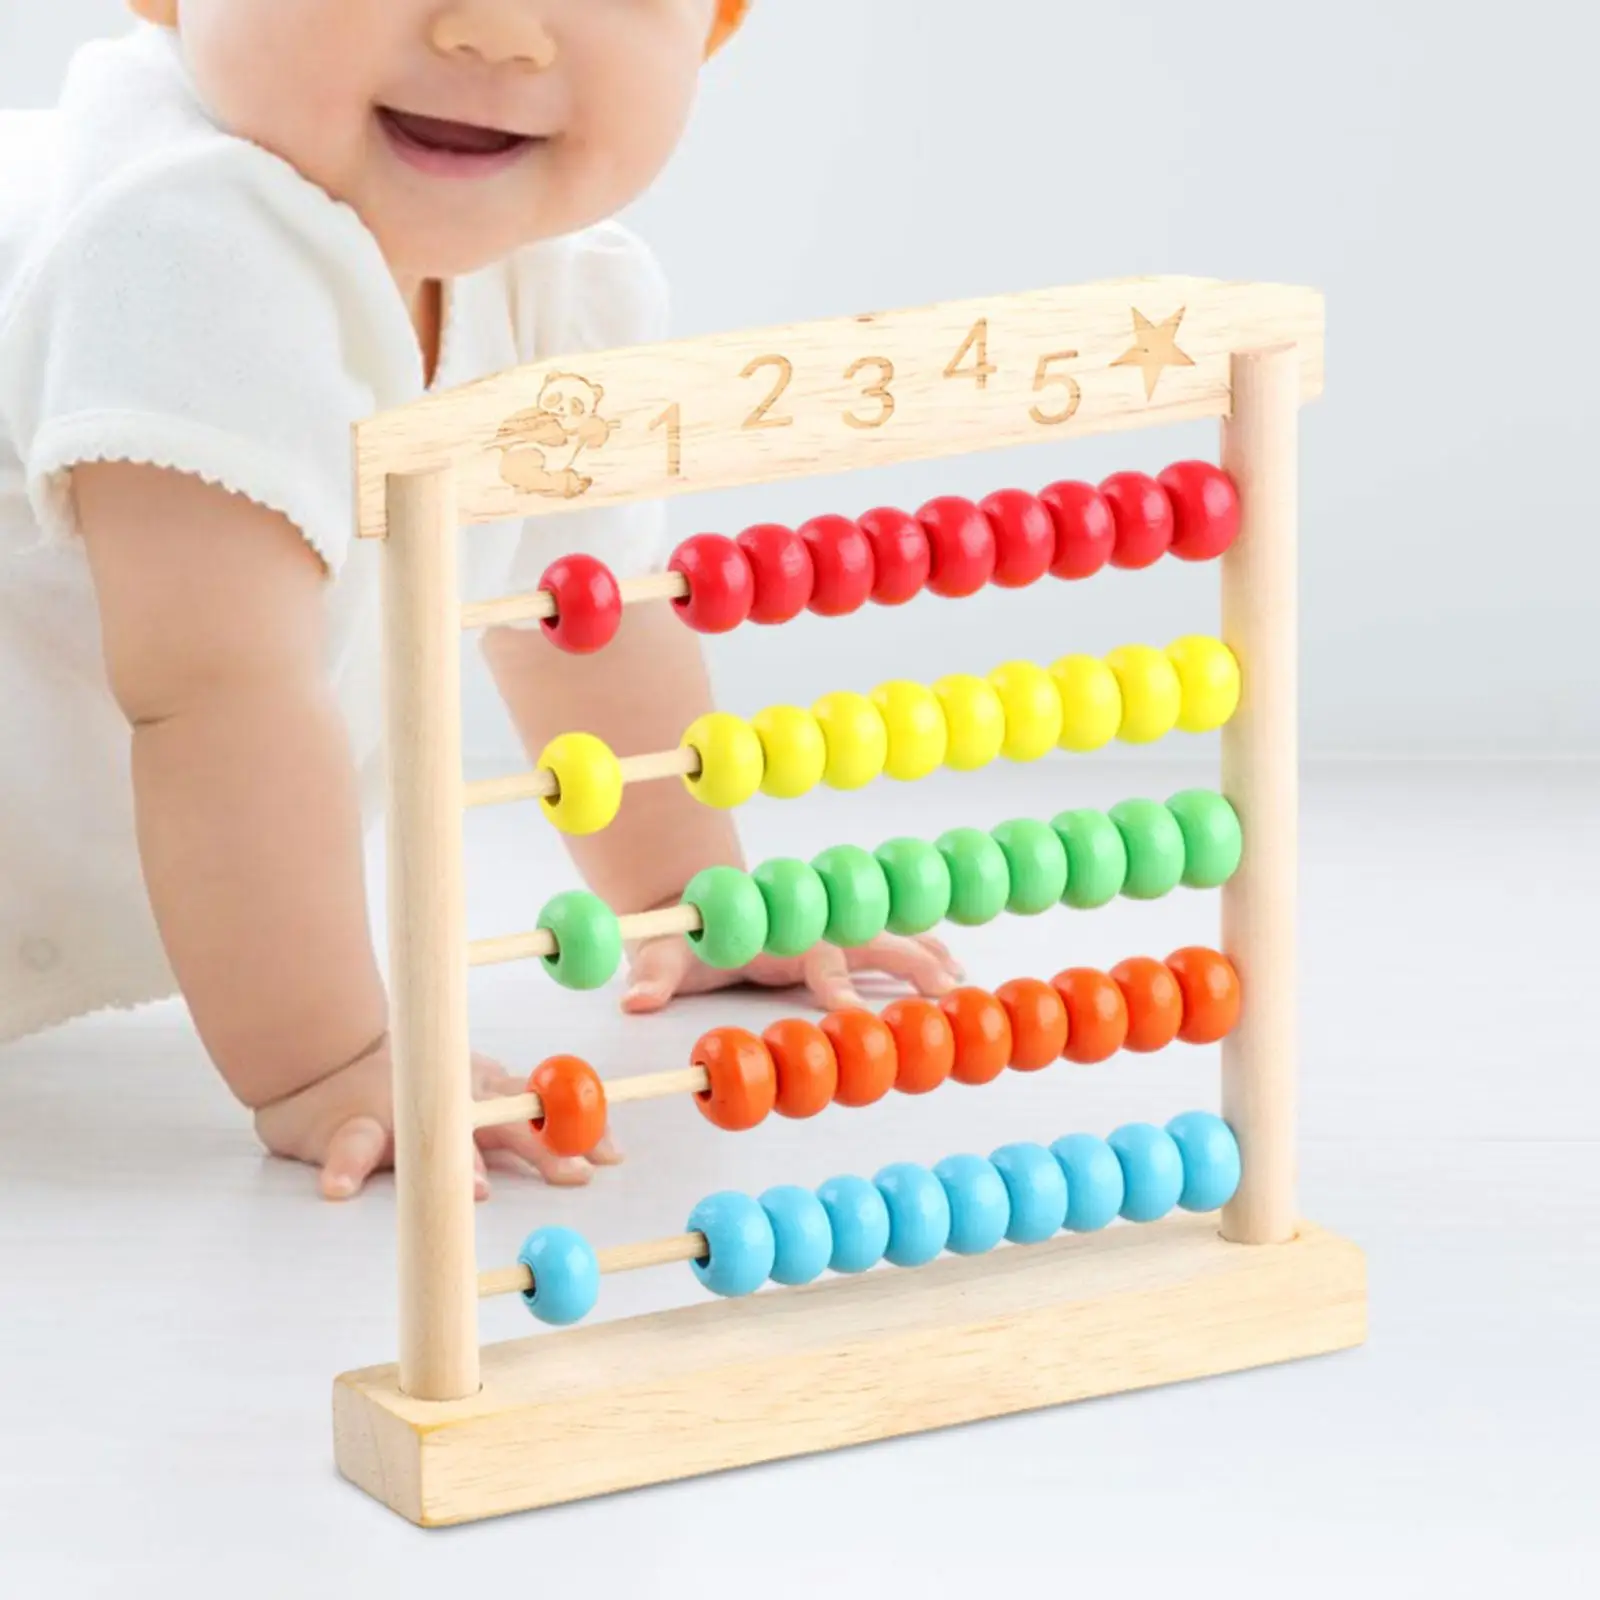 Educational Abacus for Kids with Colorful Beads Math Manipulative Wooden Counting Frame for Kindergarten Kids Baby Preschool